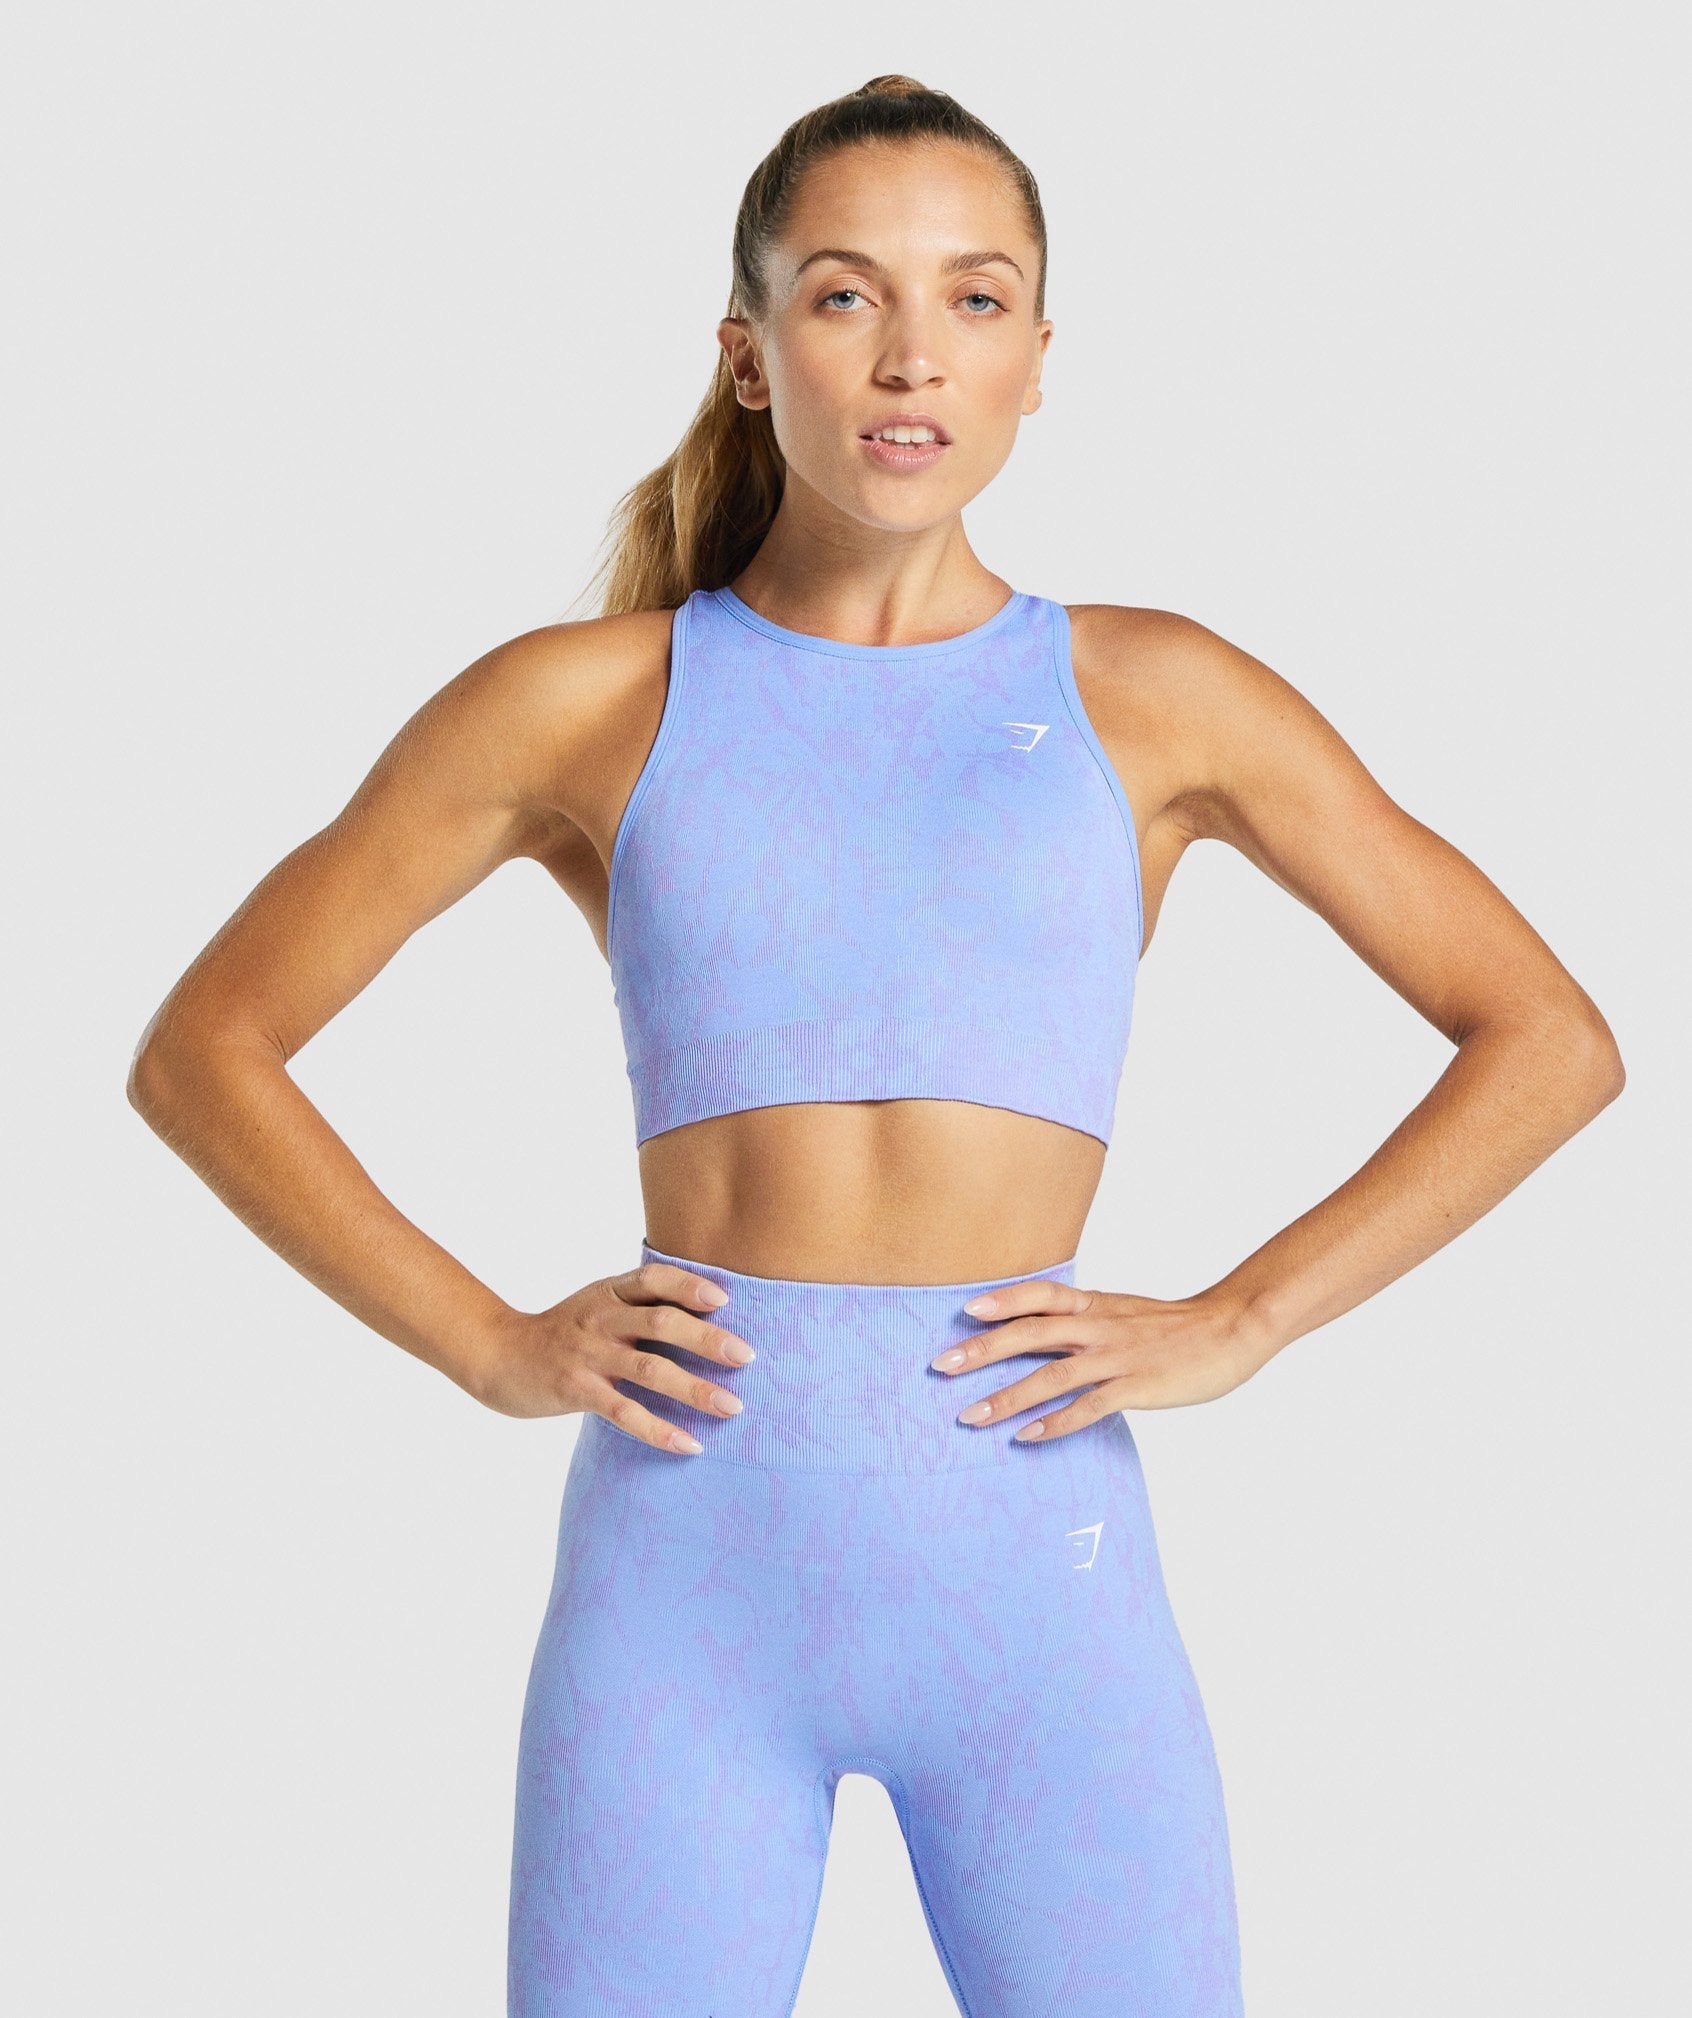 Gymshark Legacy Sports Bra Blue Size XS - $35 New With Tags - From Sun